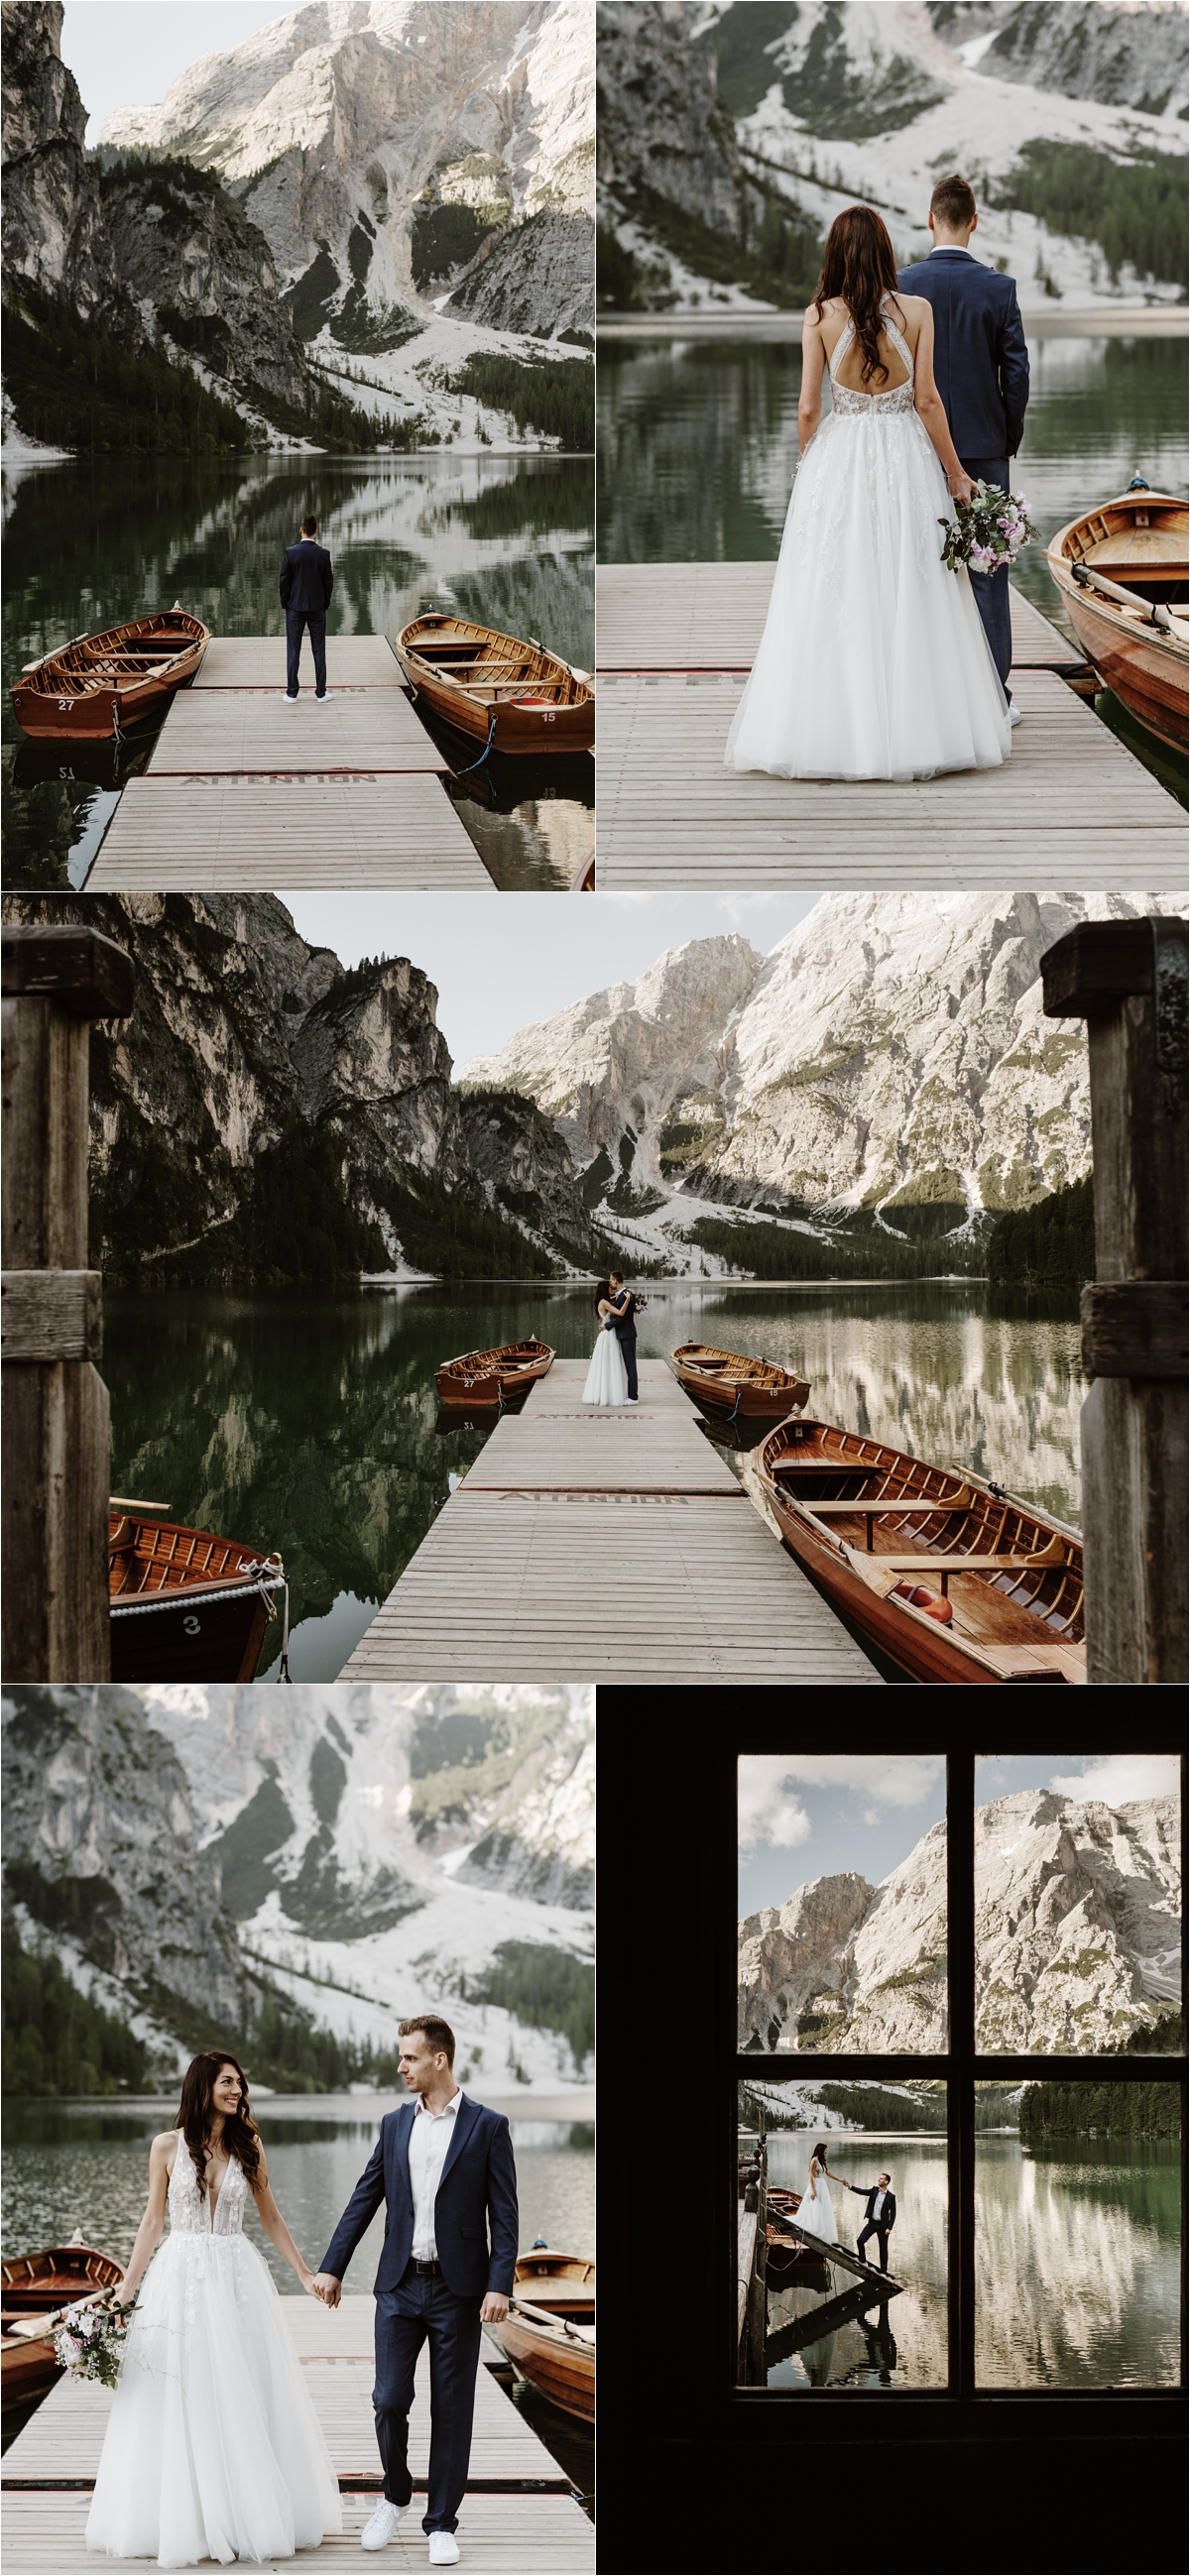 A first look at the boathouse on Lago di Braies. Photography by Wild Connections Photography